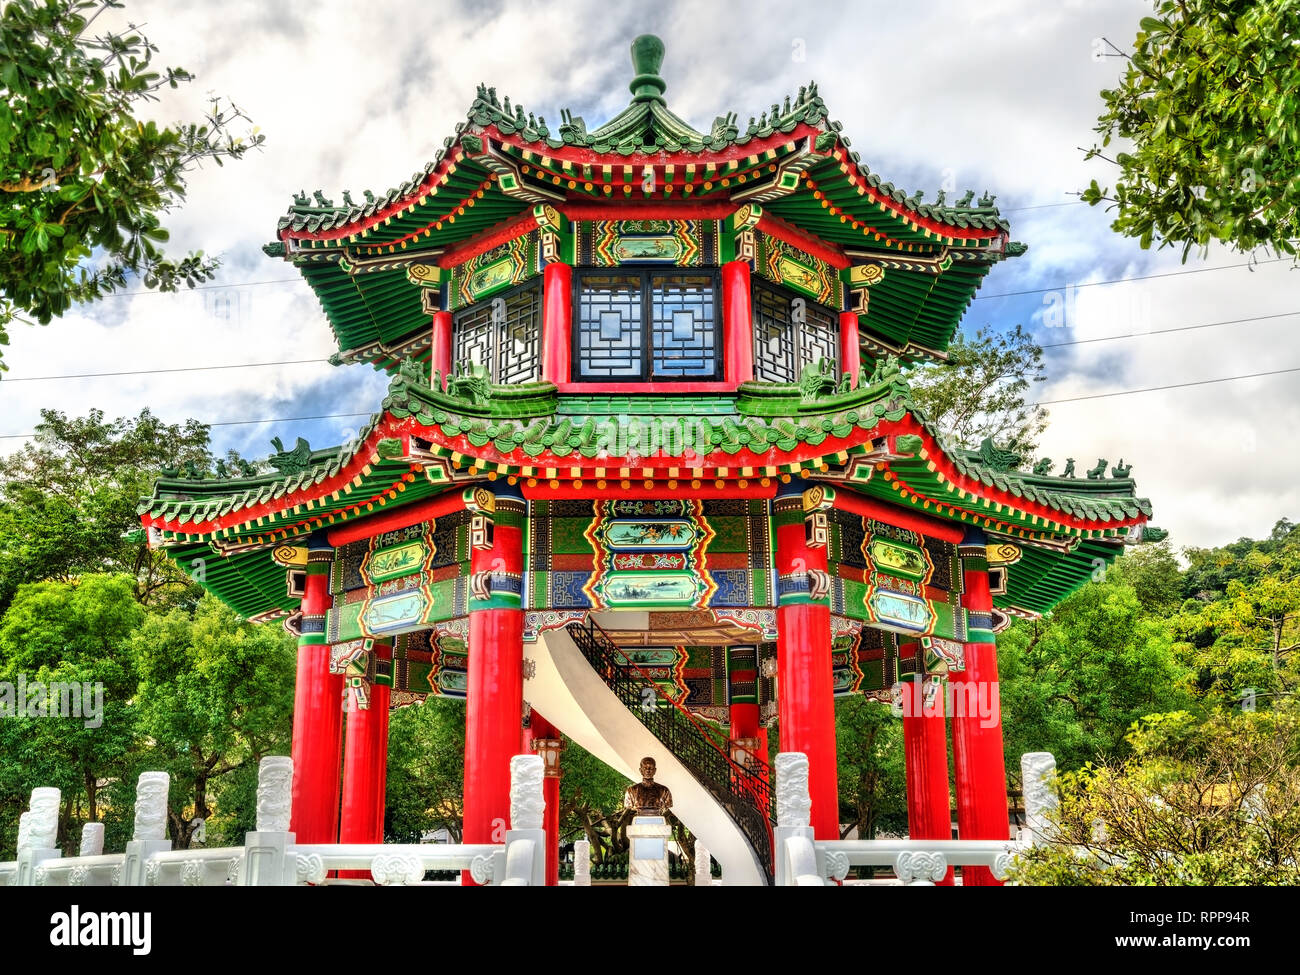 Drum Tower at National Revolutionary Martyrs Shrine in Taipei, Taiwan Stock Photo